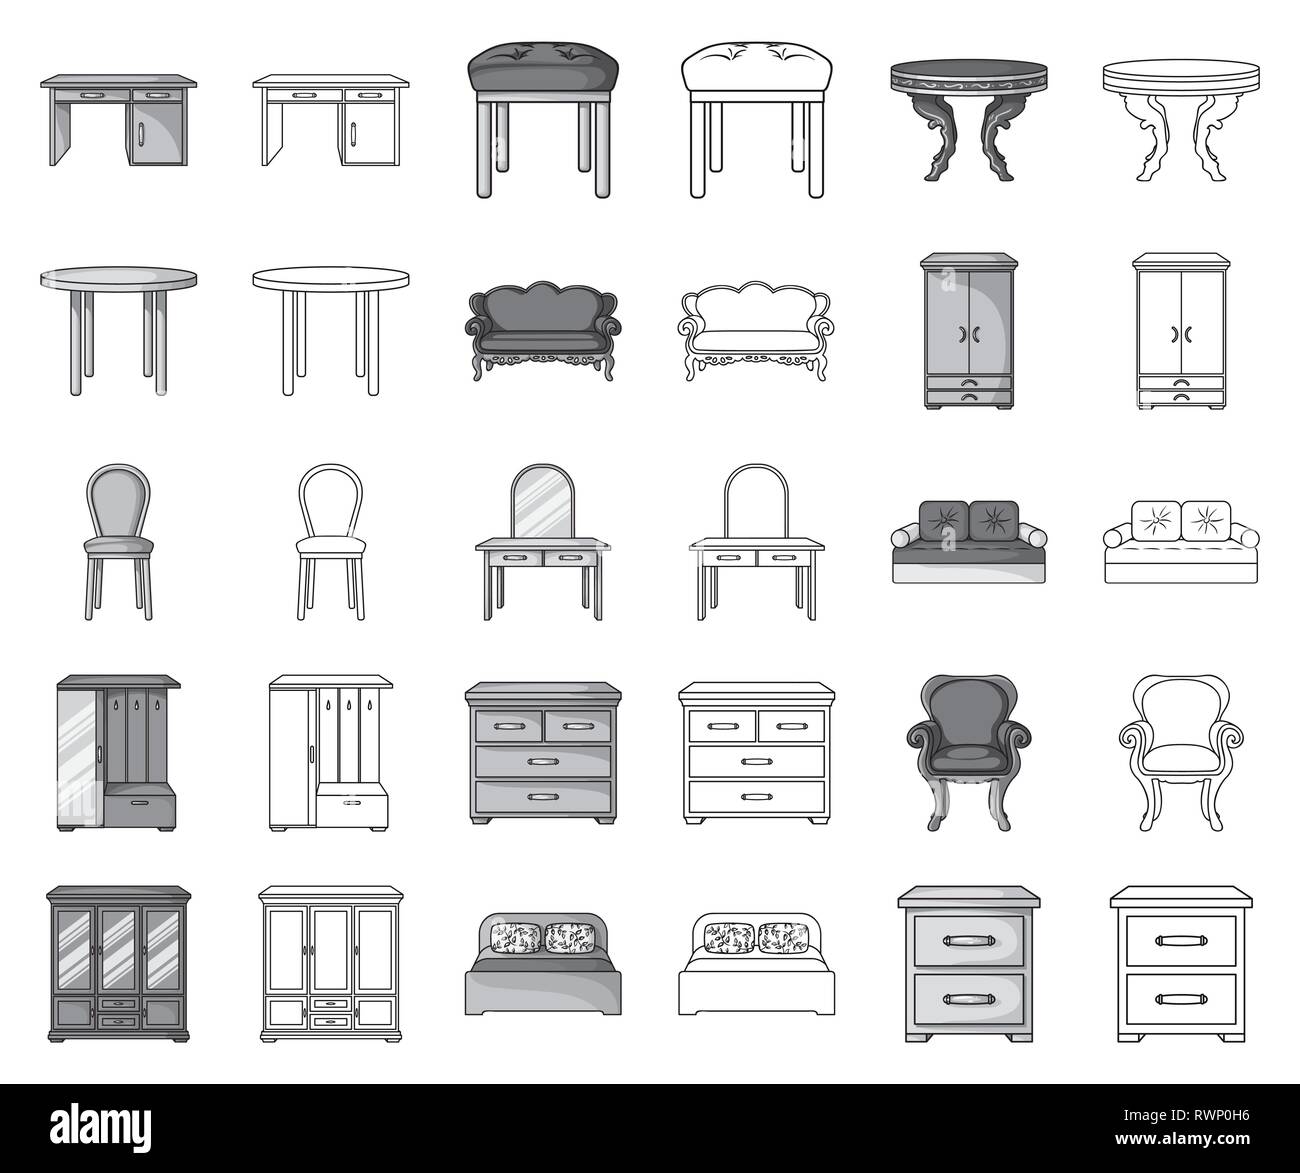 accessory,apartment,armchair,art,back,baroque,bed,bedside,cabinet,chair,classical,closet,collection,couch,cupboard,design,desk,double,drawers,dressing,furnishing,furniture,home,house,icon,illustration,interior,isolated,logo,modern,monochrome,outline,office,retro,round,set,sign,sofa,stool,symbol,table,various,vector,vestibule,vintage,wardrobe,web,wing,wooden Vector Vectors , Stock Vector